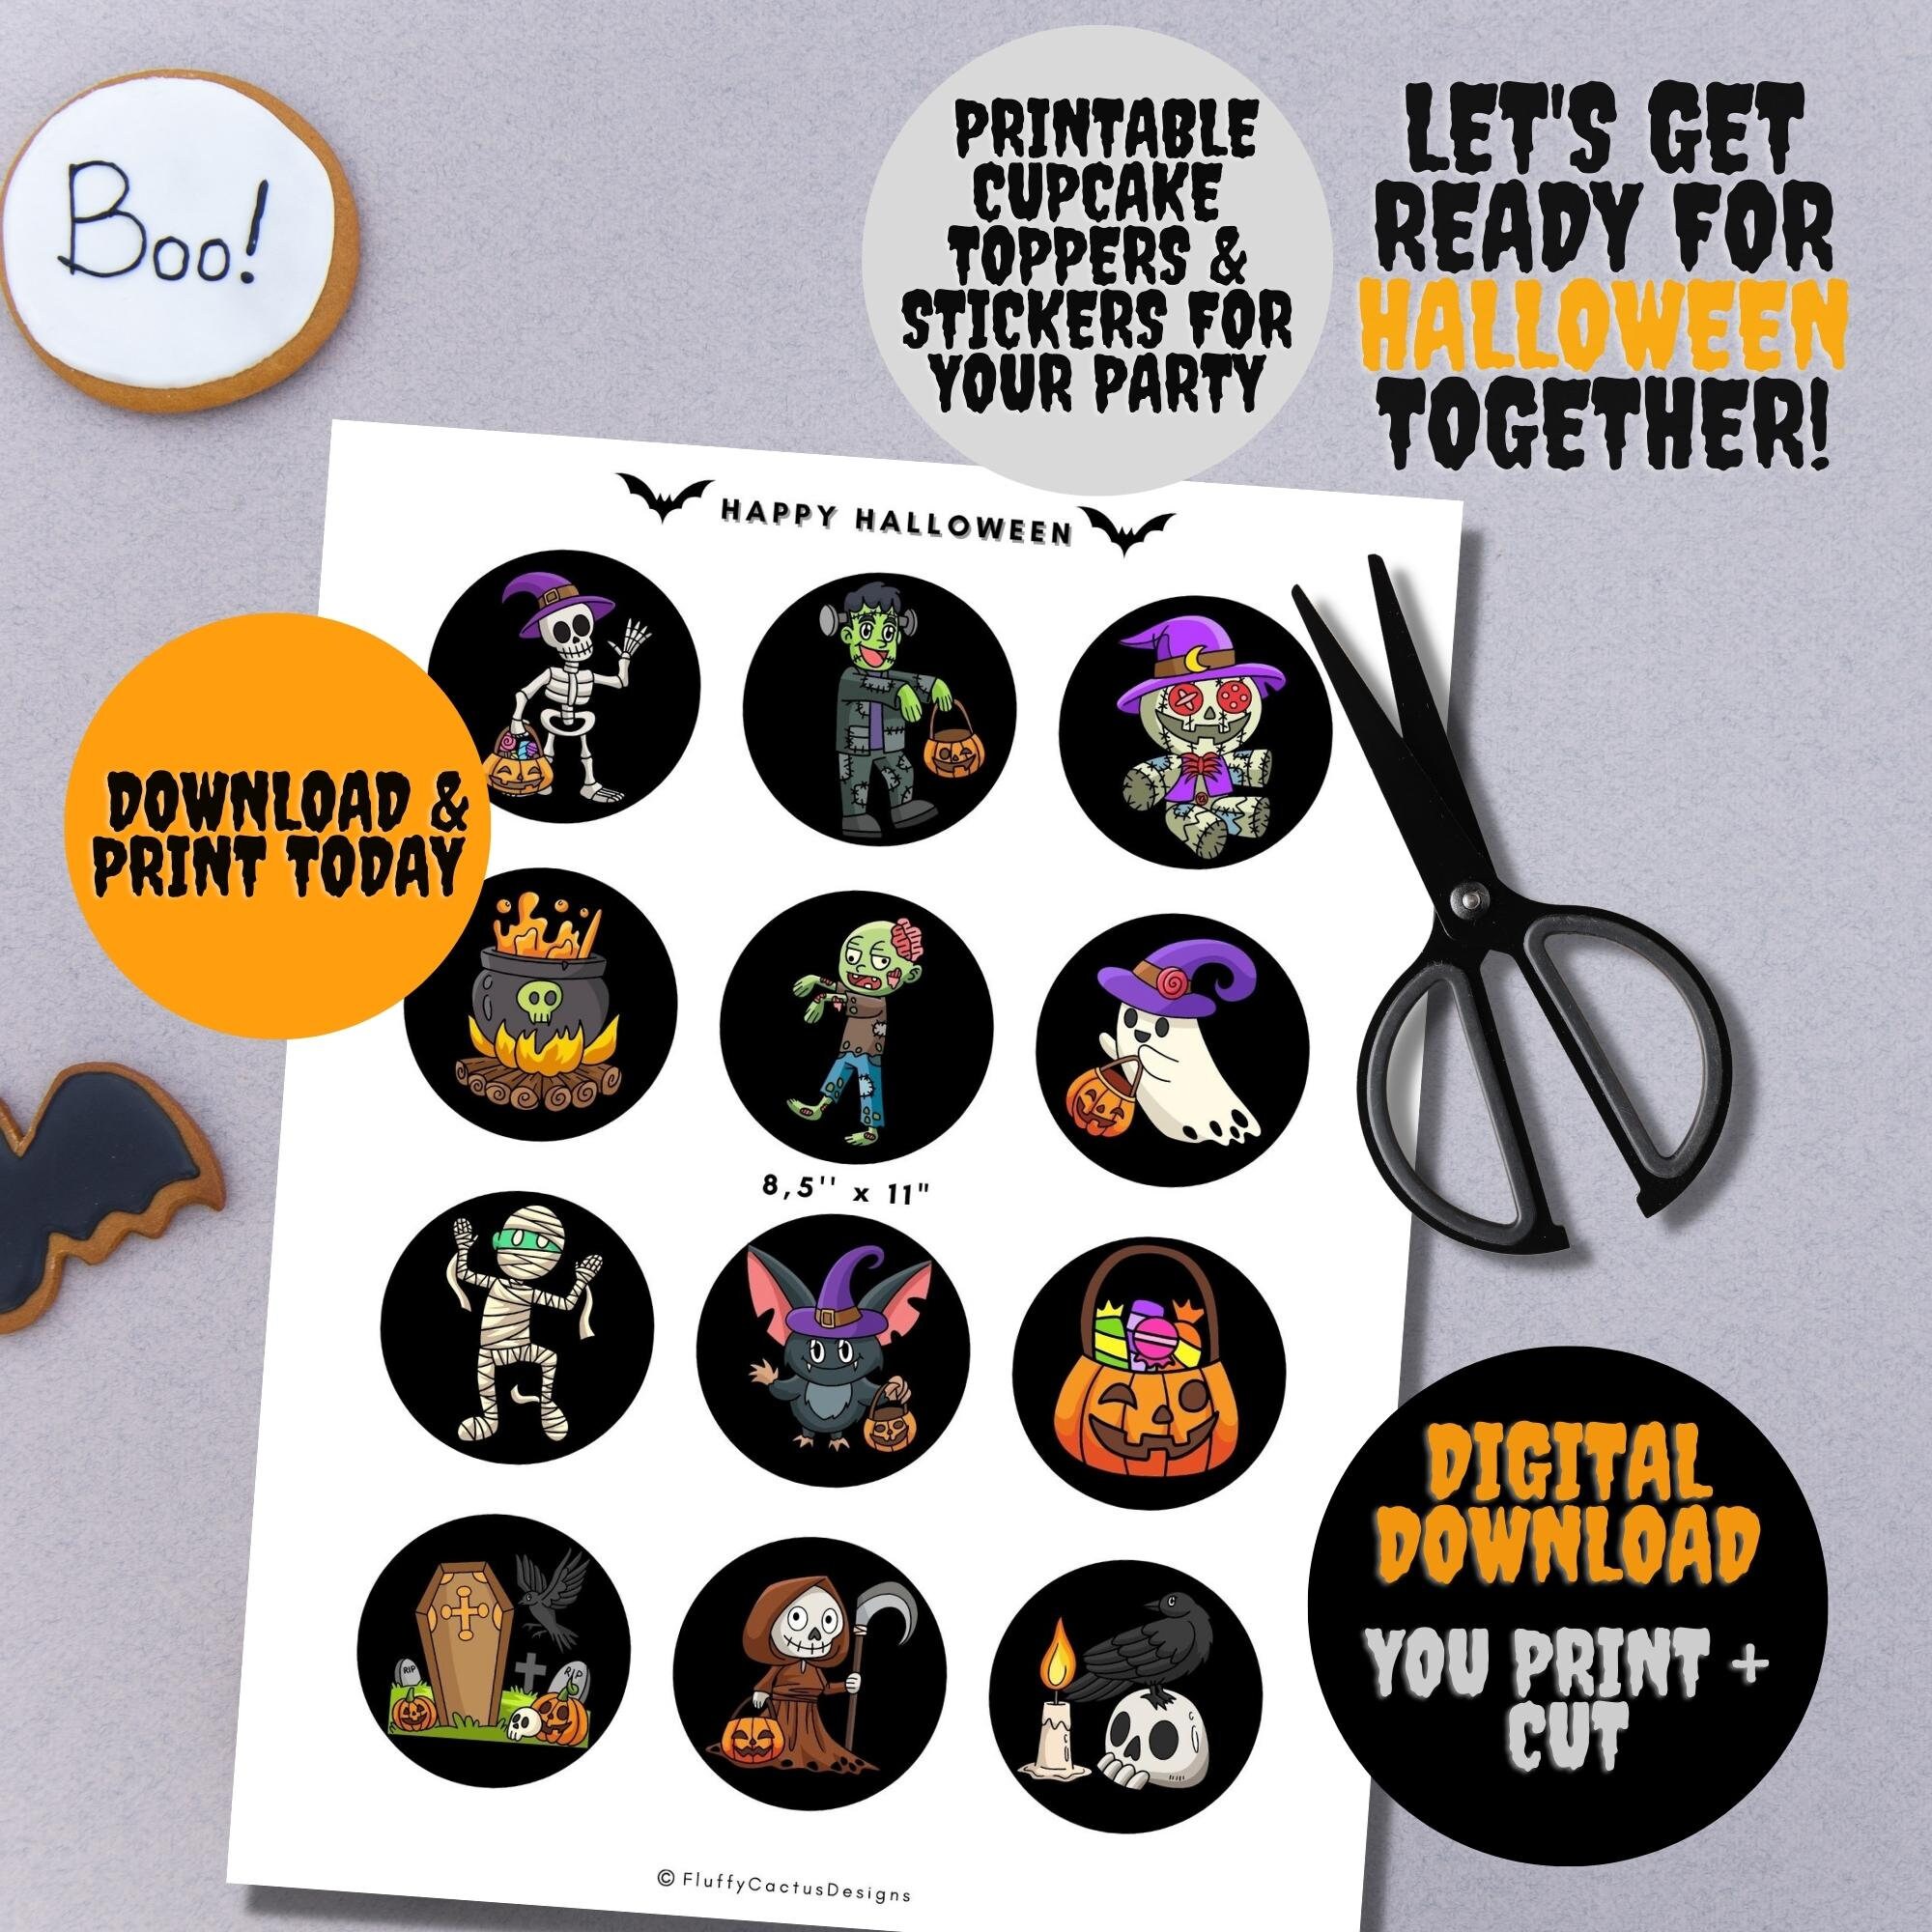 Happy Halloween Decor Printable Cupcake Toppers Stickers - Etsy